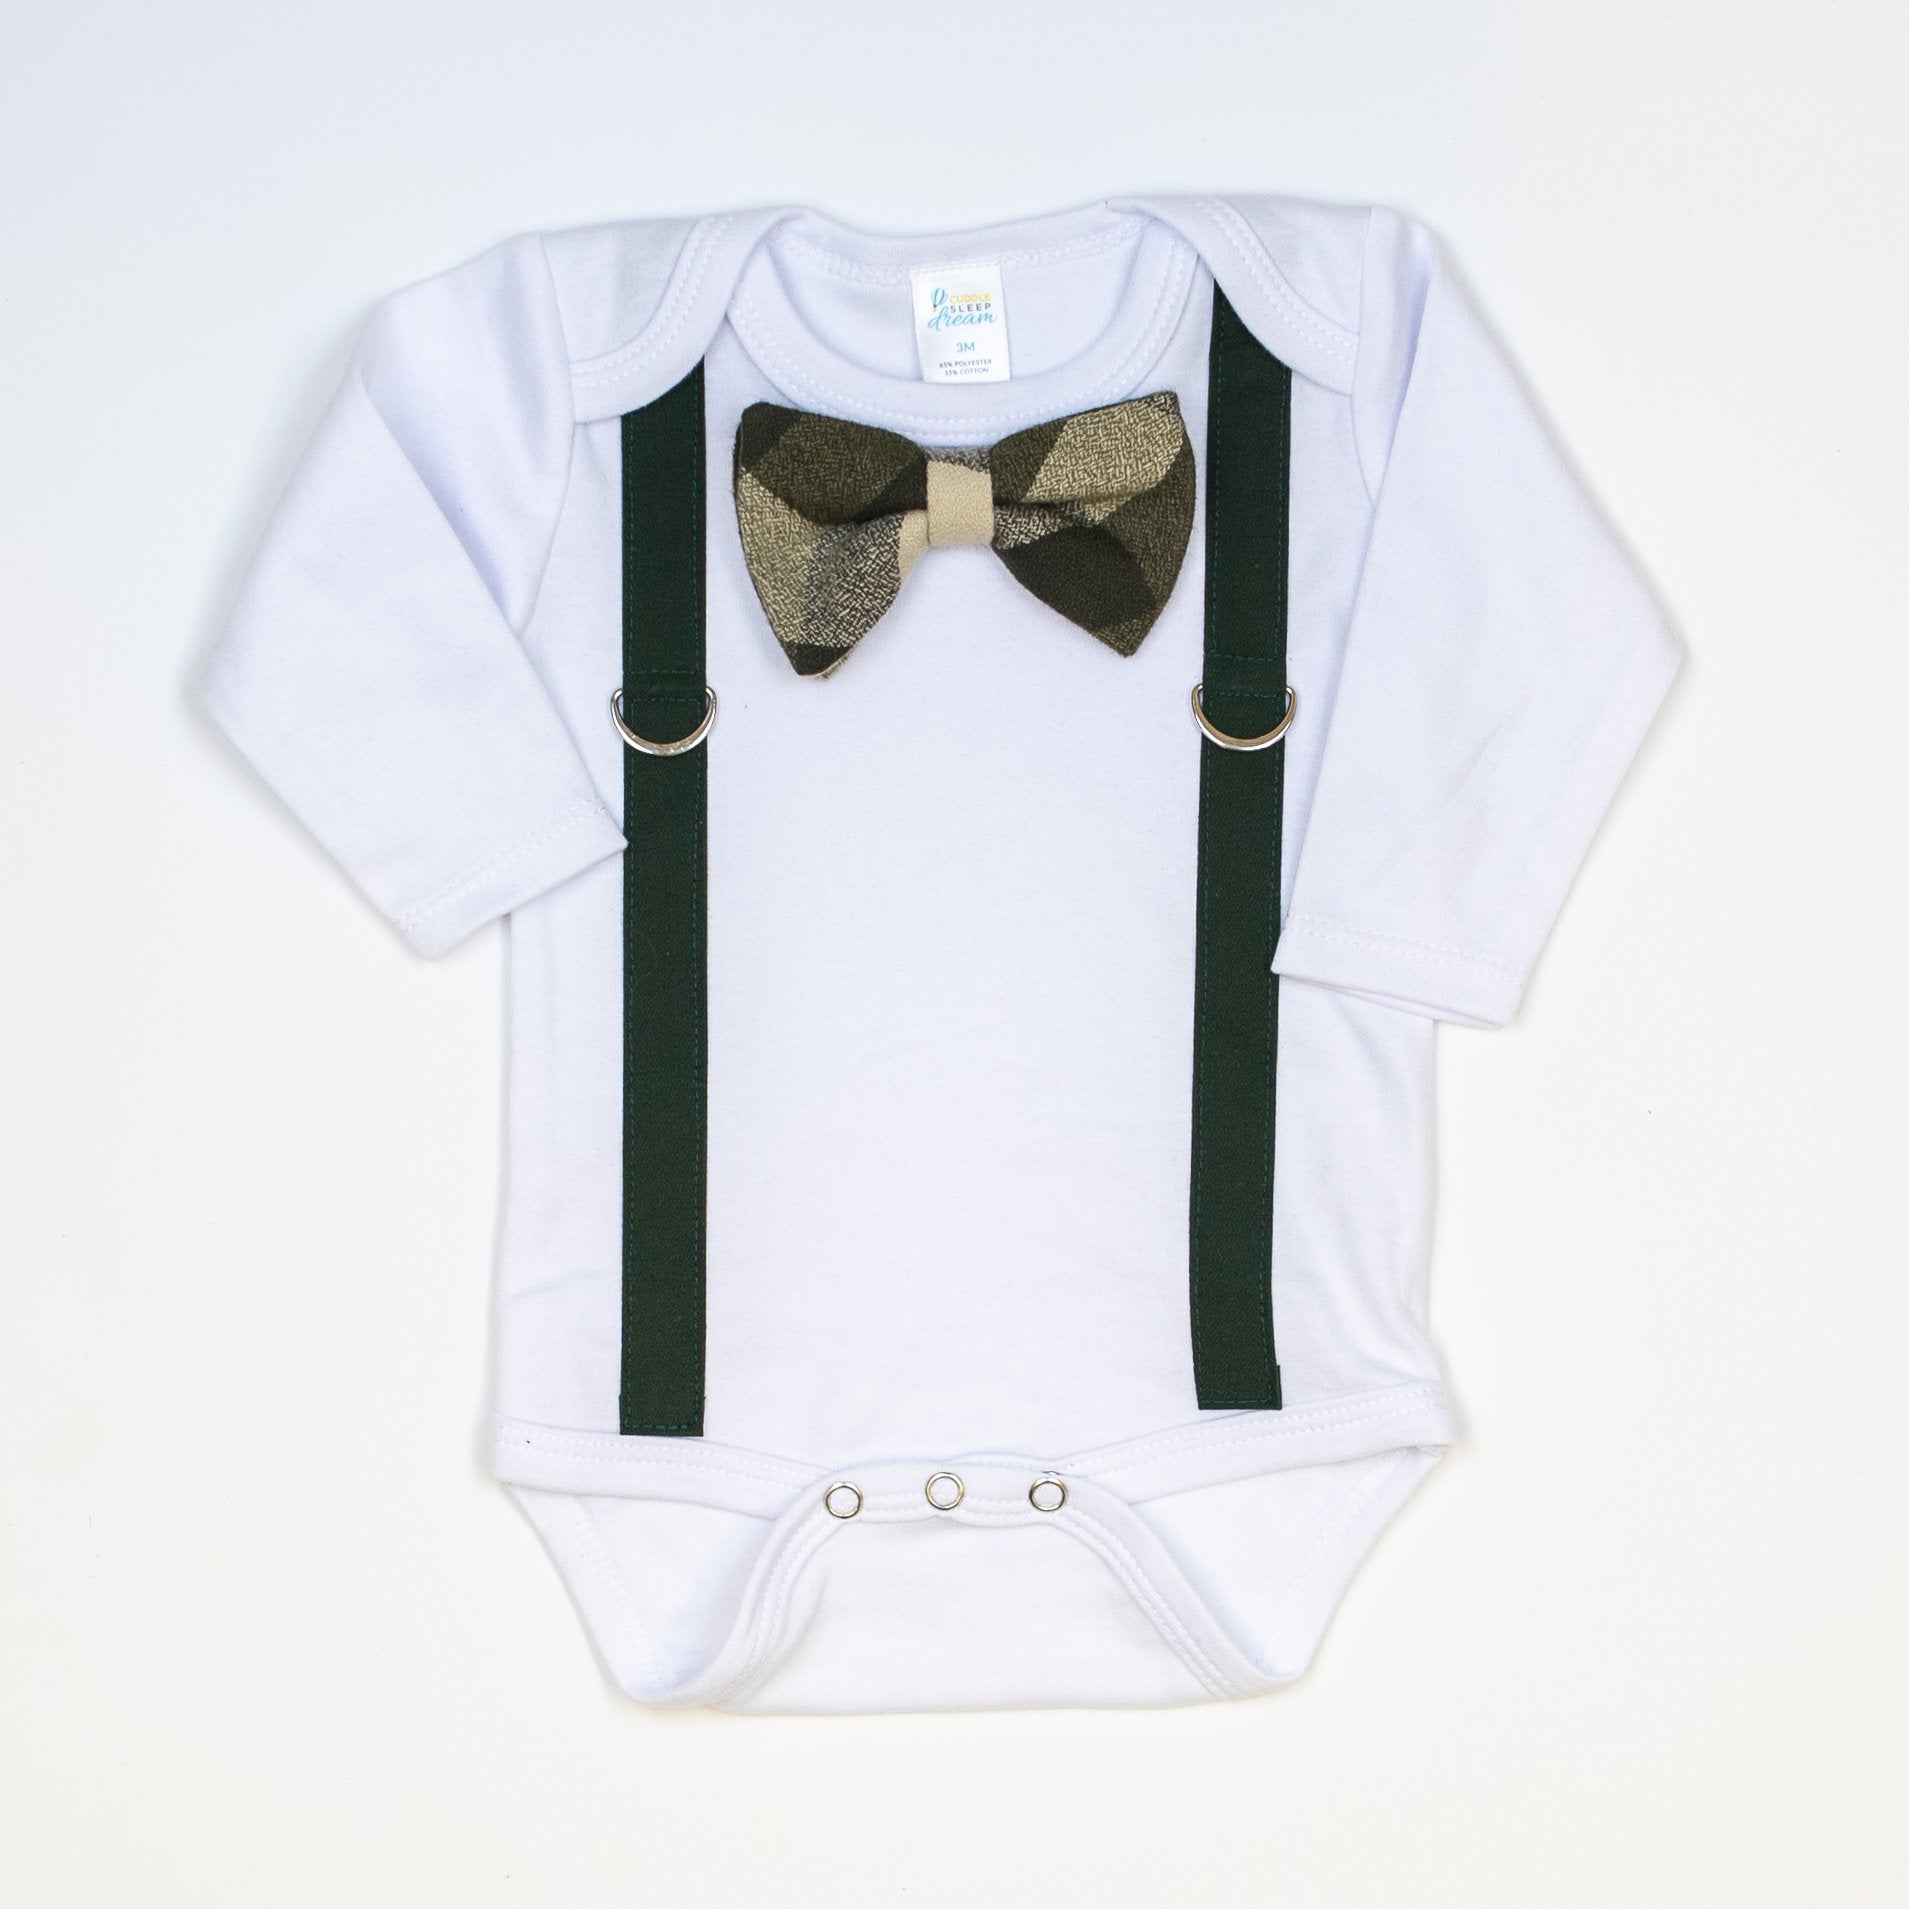 Cuddle Sleep Dream Oh Snap Forest Suspender | Olive & Brown Plaid Bow Tie